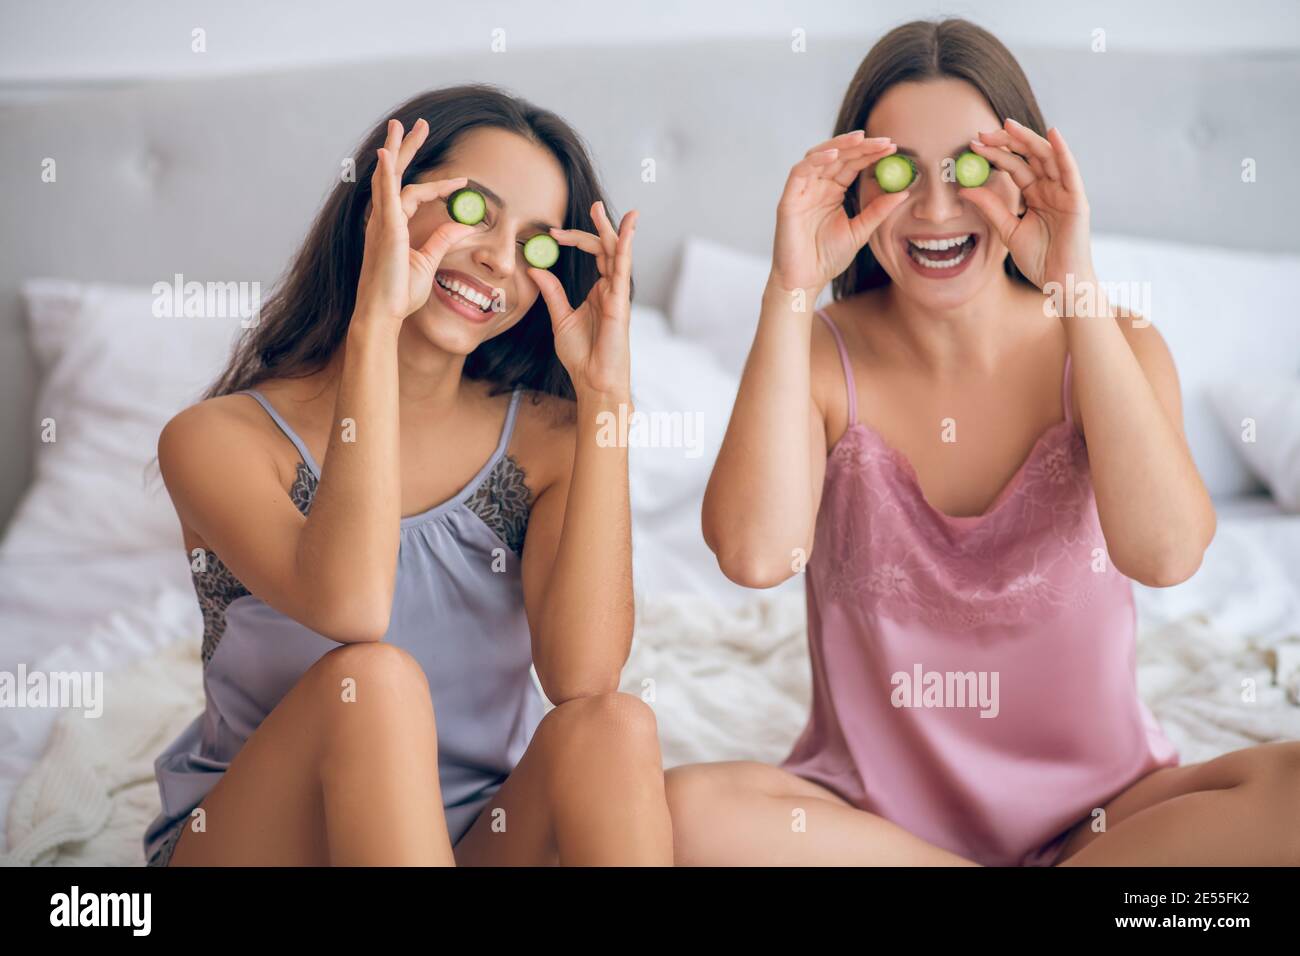 Two cute young girls with slices of cucumber in hands Stock Photo